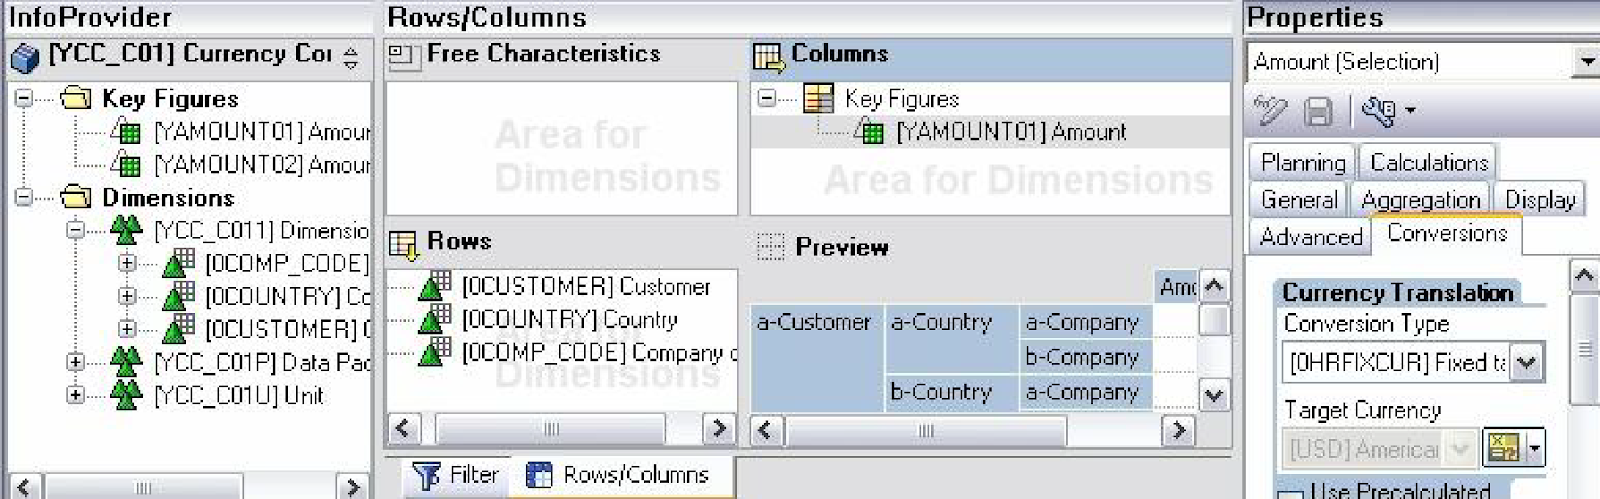 Currency translation BW currency conversion